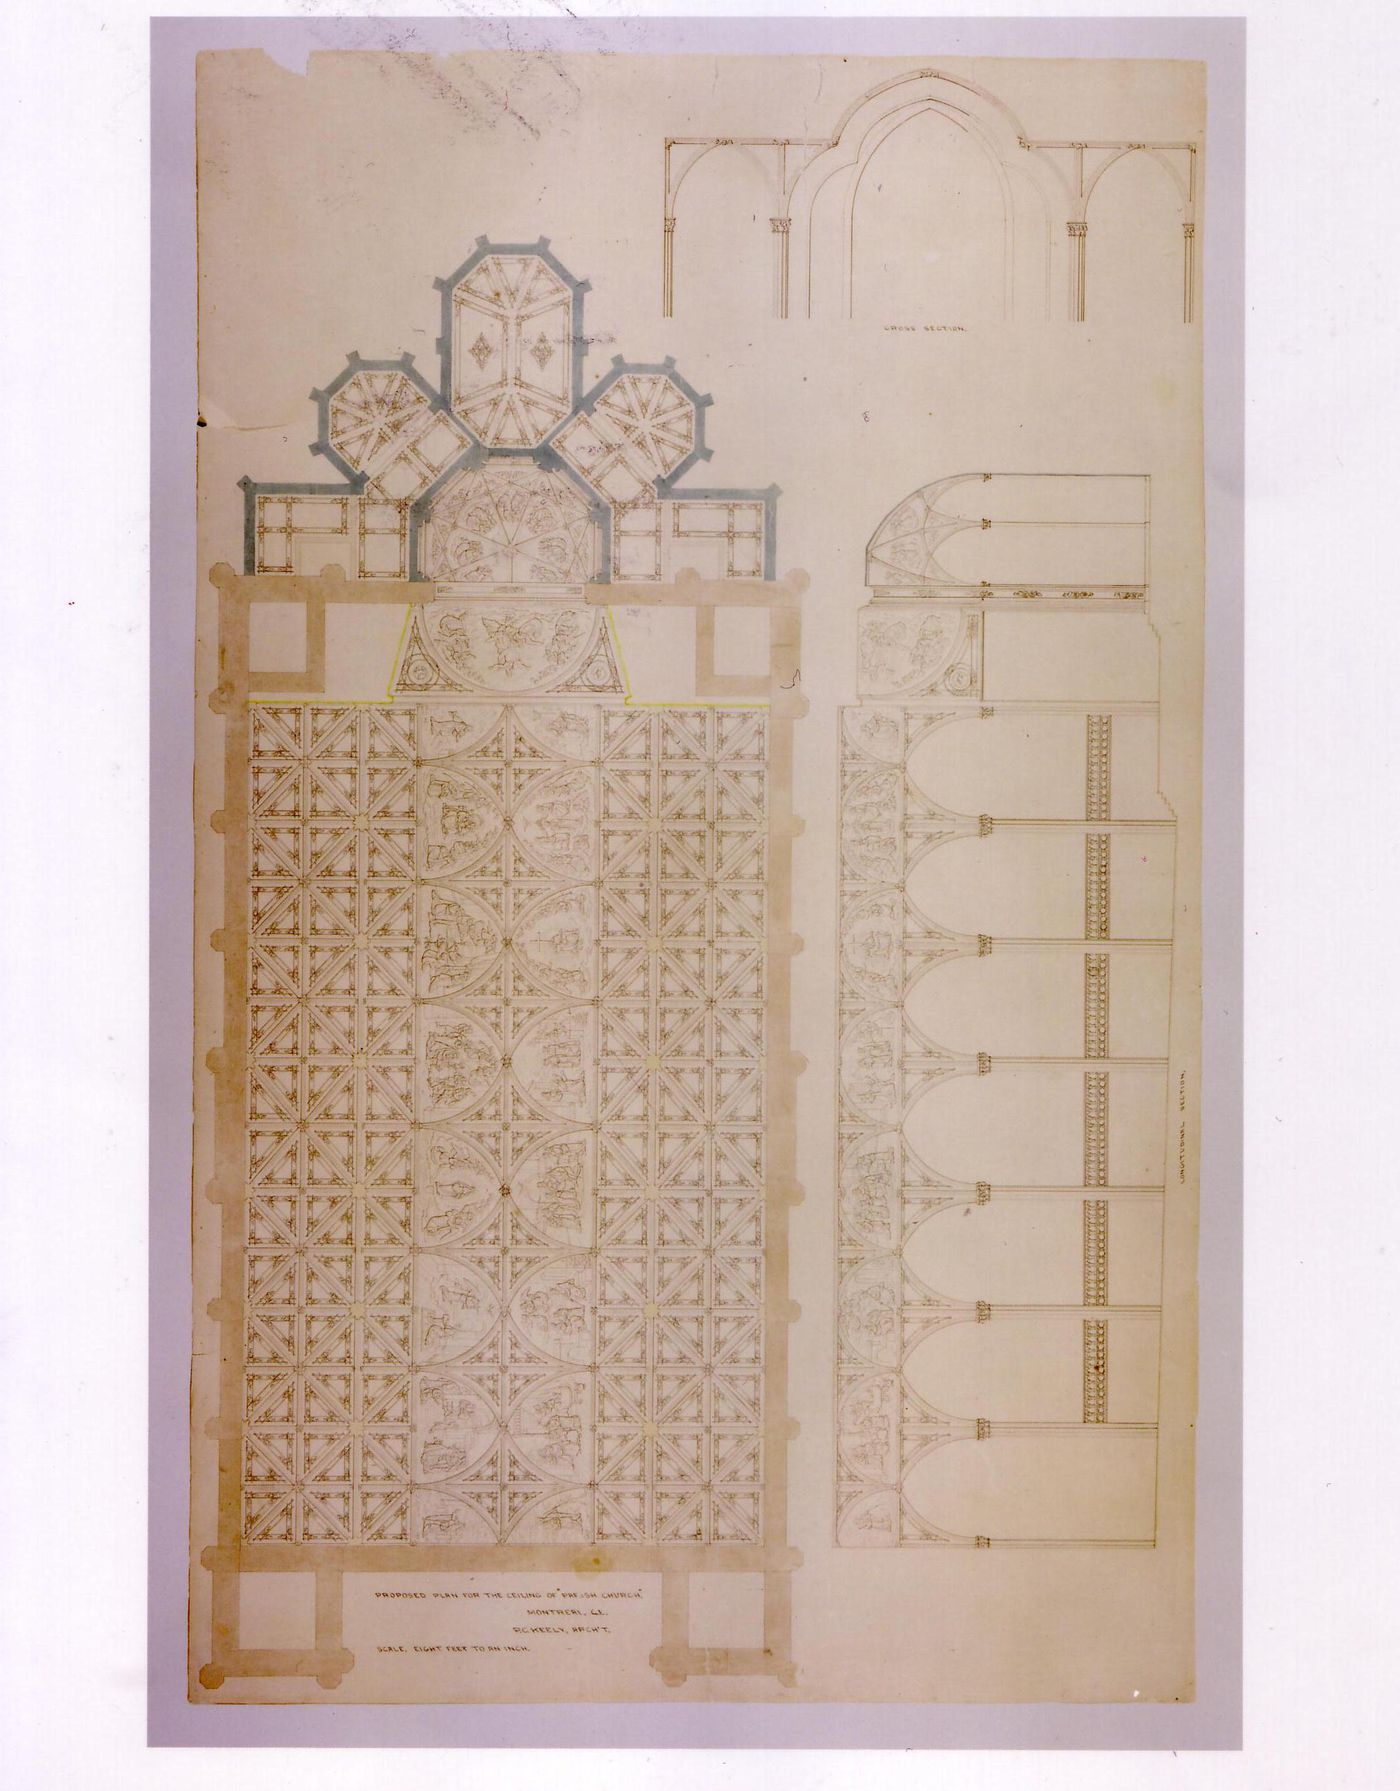 Ceiling plan and longitudinal and cross sections for the interior design by Patrick Charles Keely for Notre-Dame de Montréal